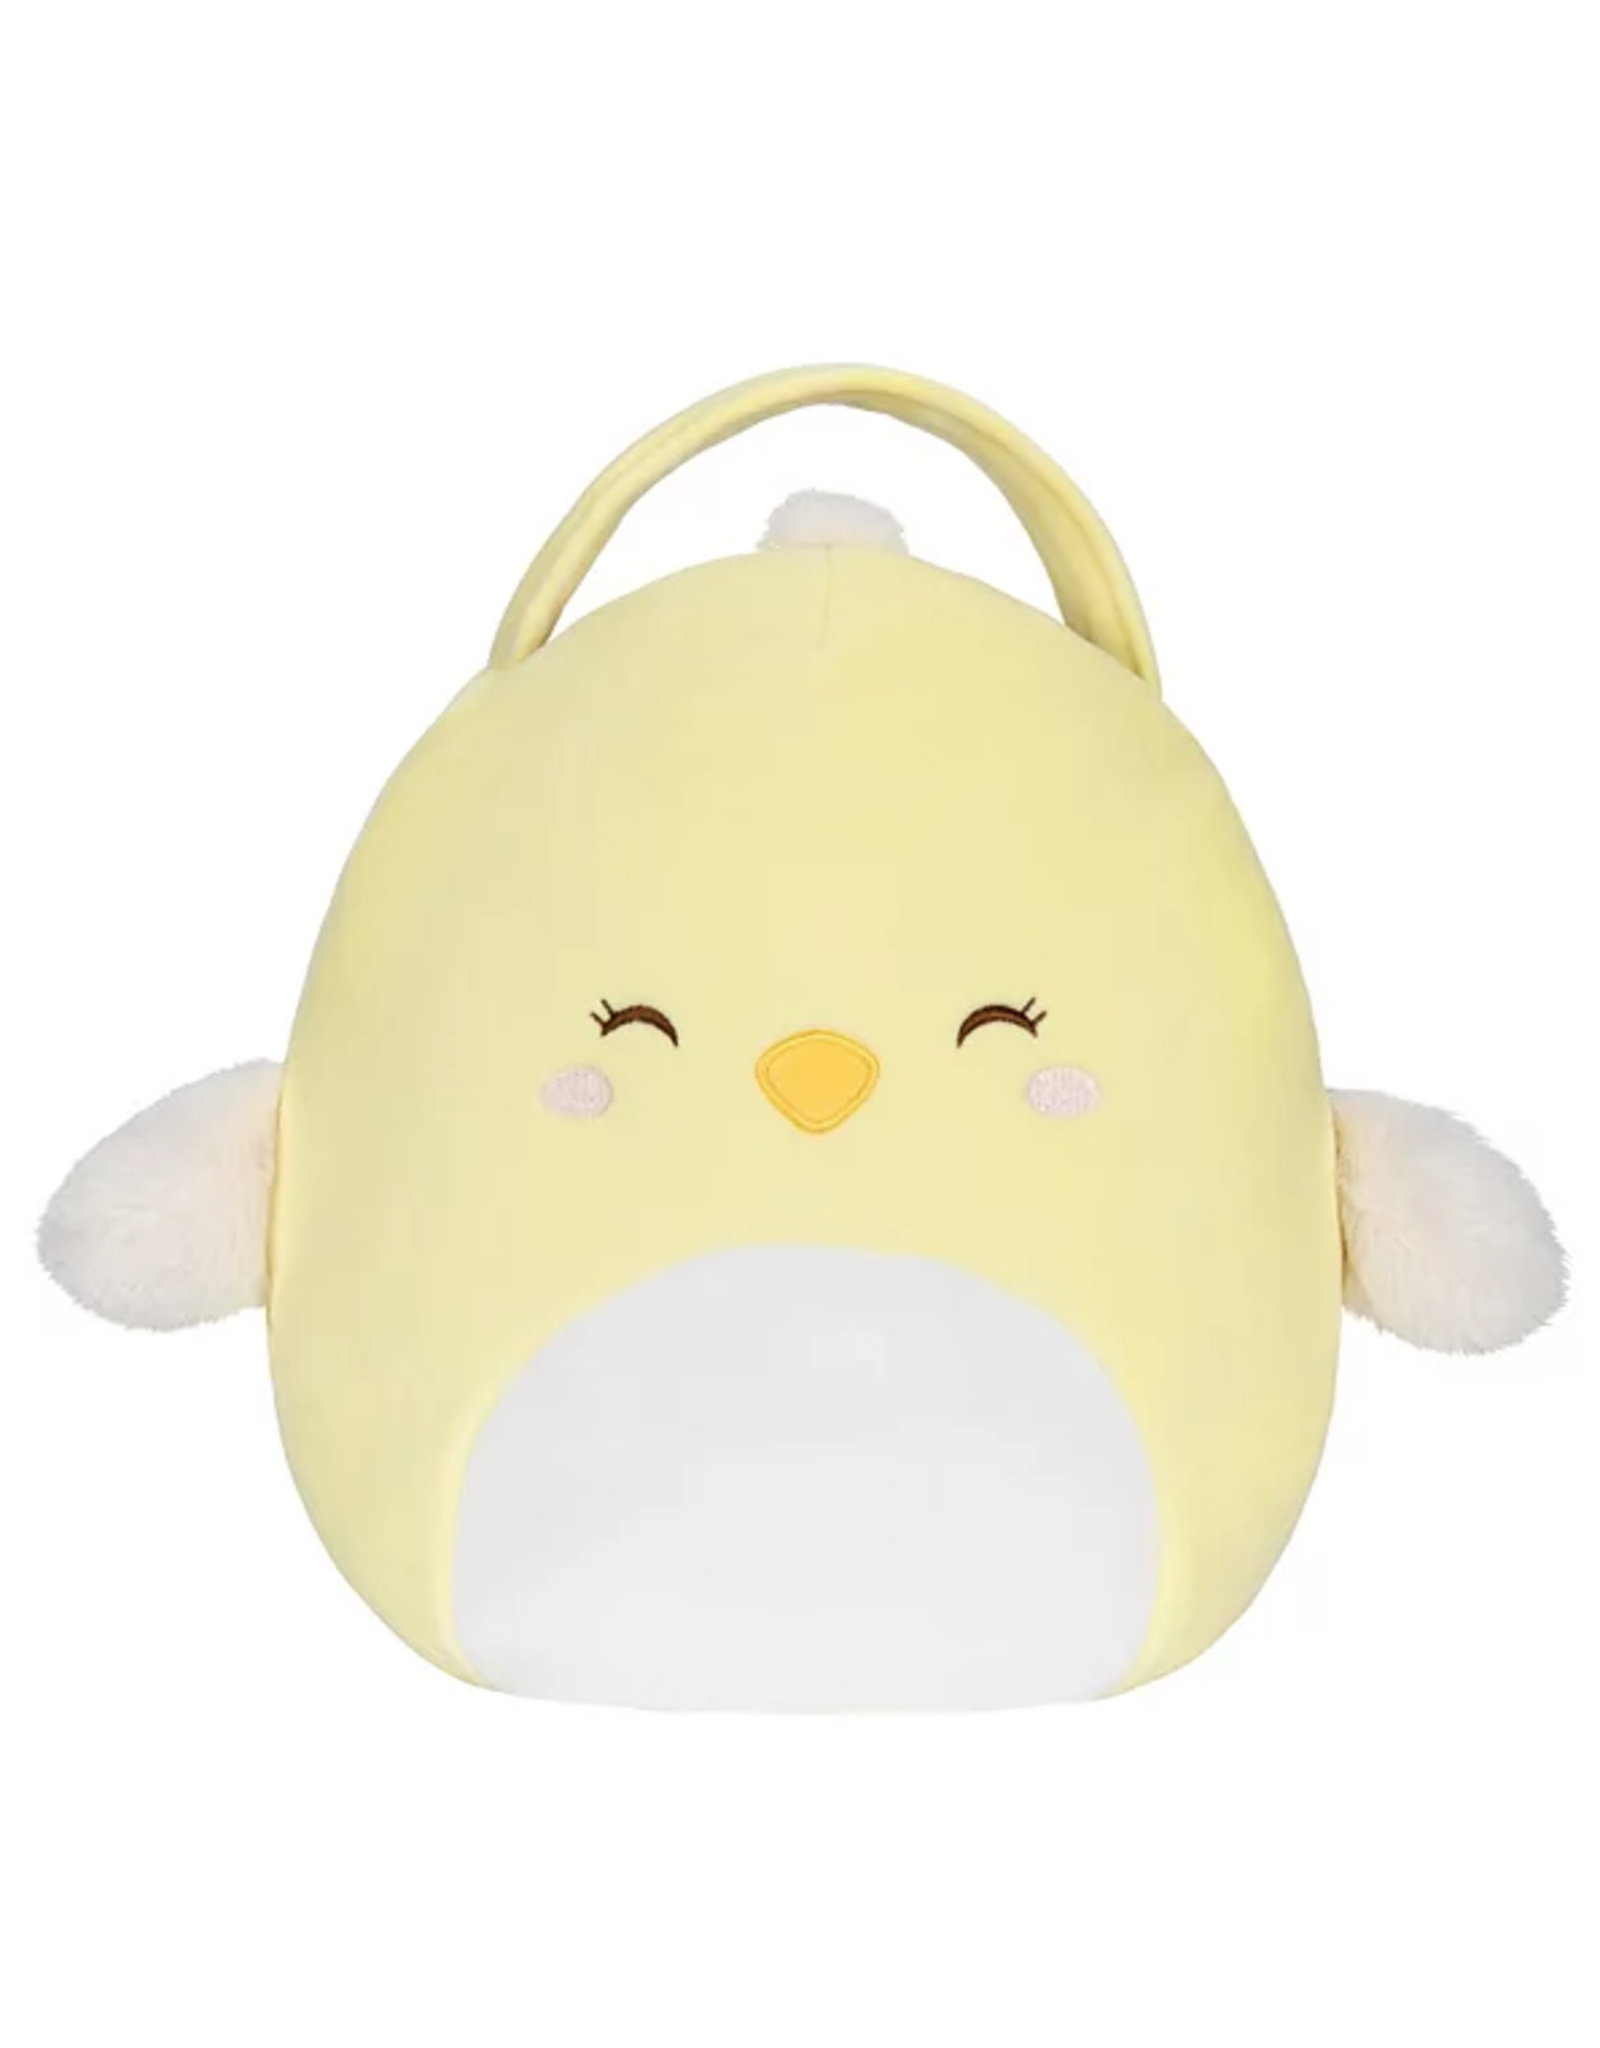 Squishmallows Squishmallows Easter Basket - Ivanna the Chick